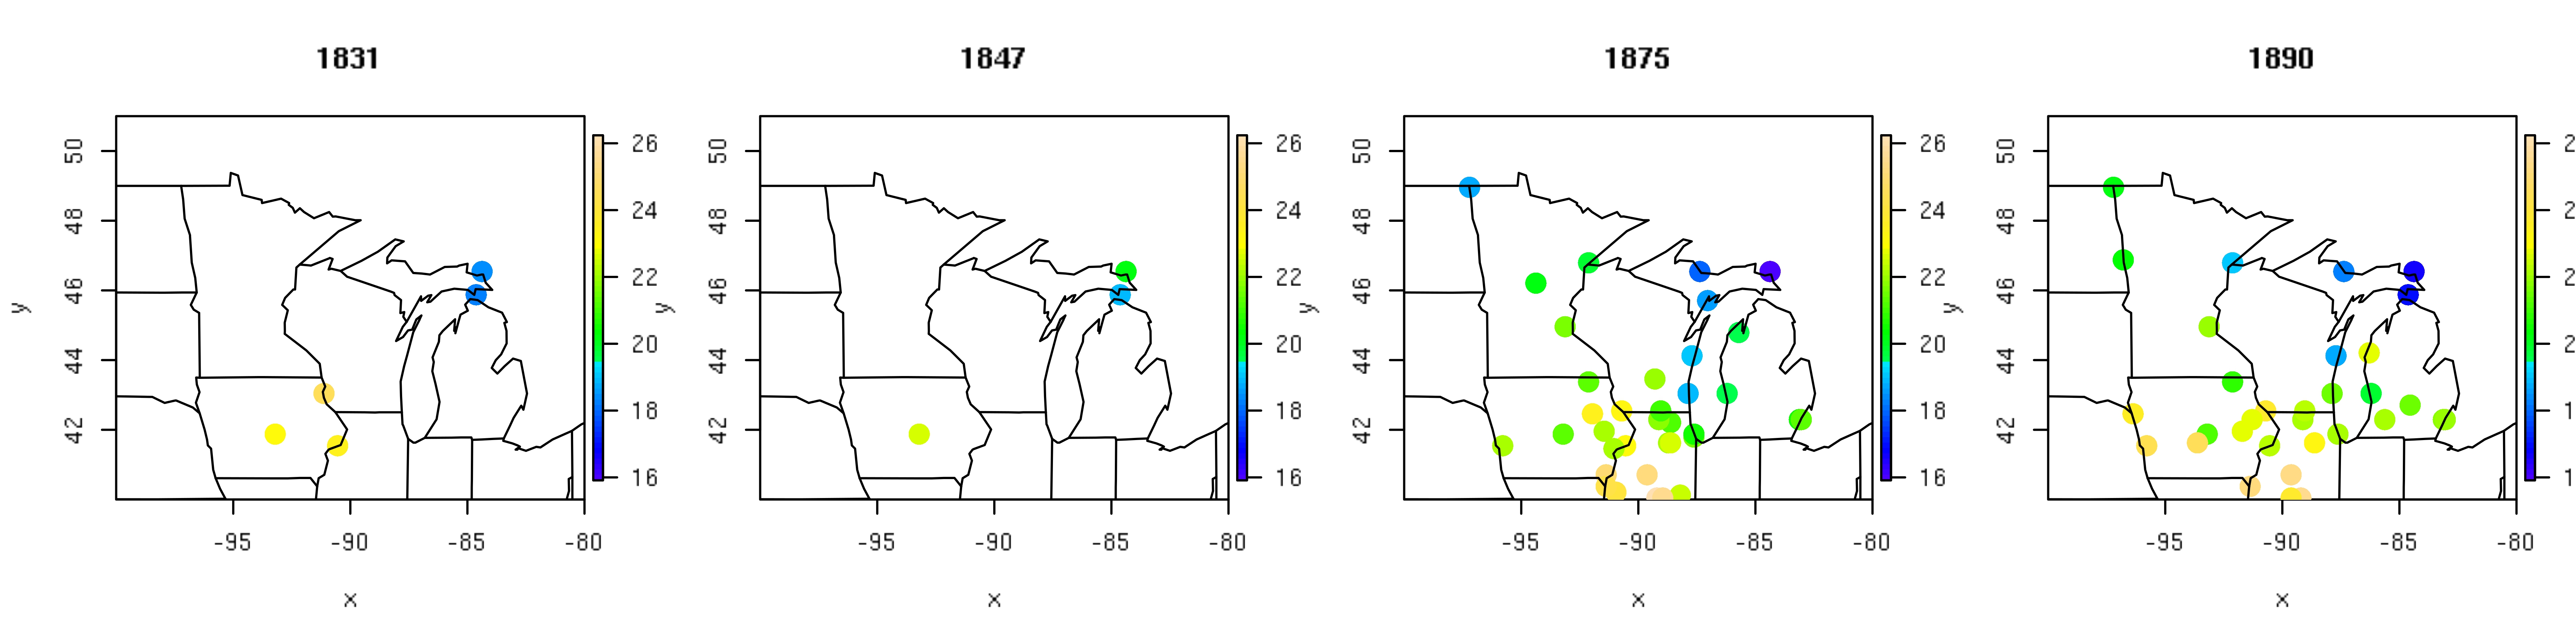 Figure 1. Four representative years of temperature records (ÂºC) from the historical fort network.